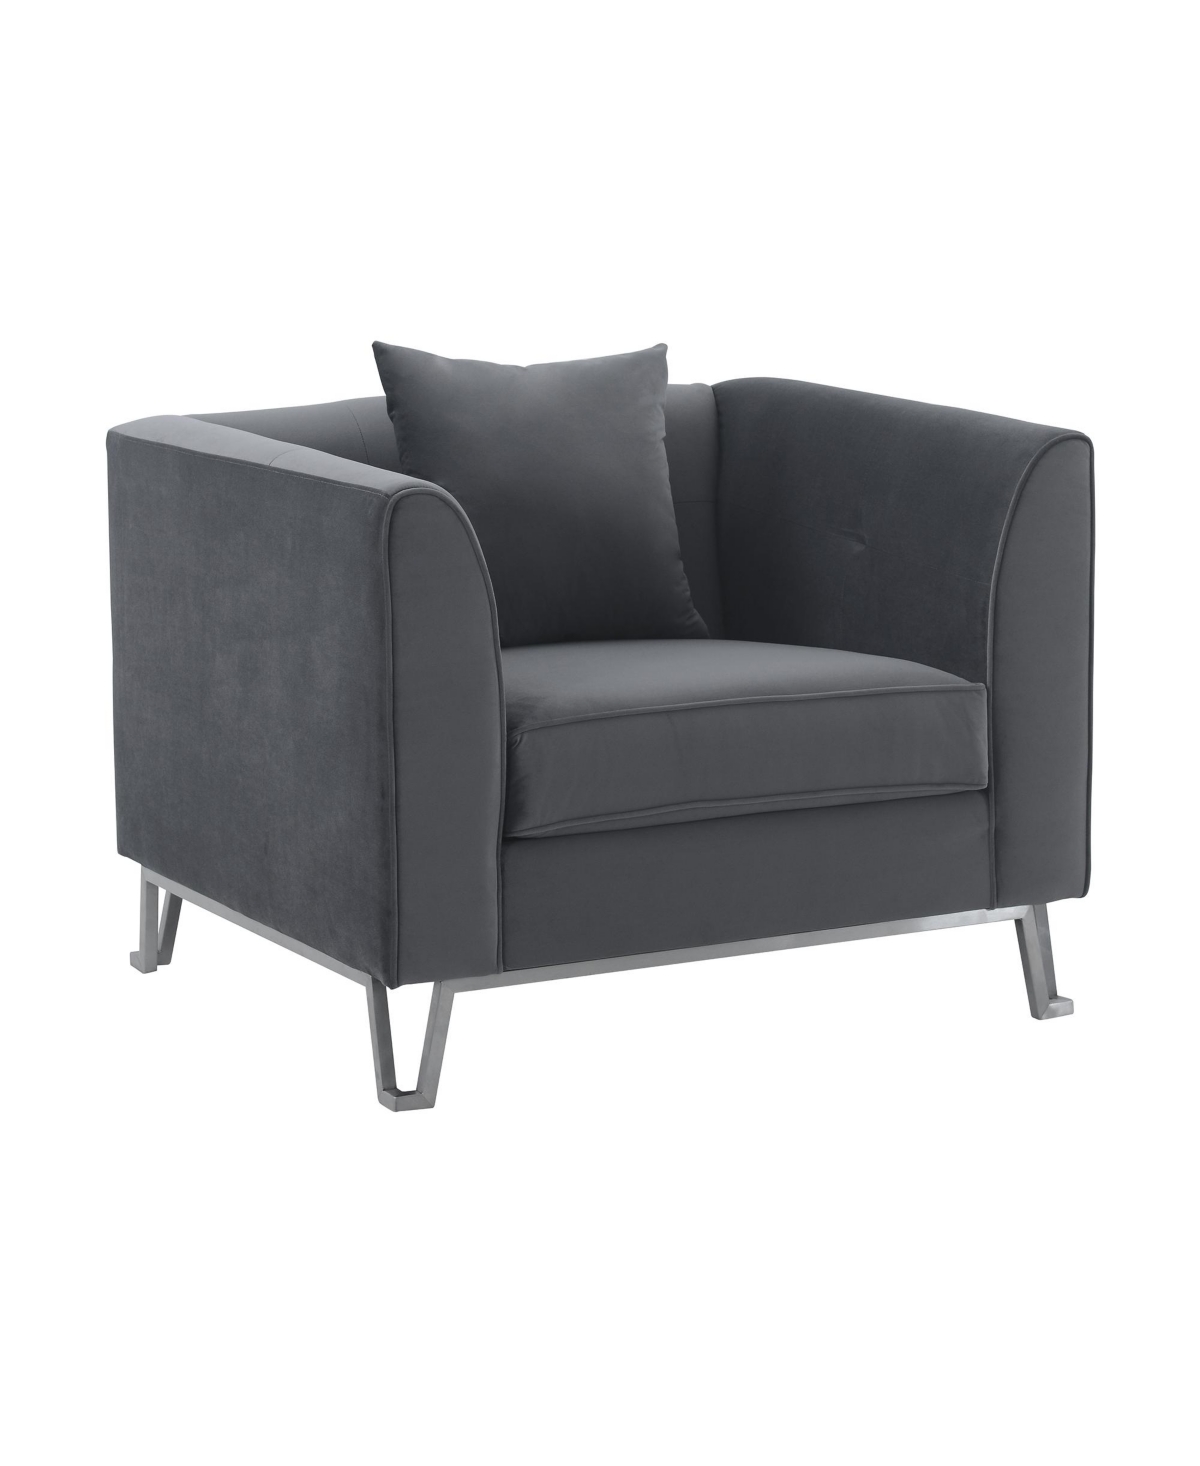 Armen Living Everest 38" Fabric Brushed Stainless Steel Legs With Upholstered Sofa Accent Chair In Gray